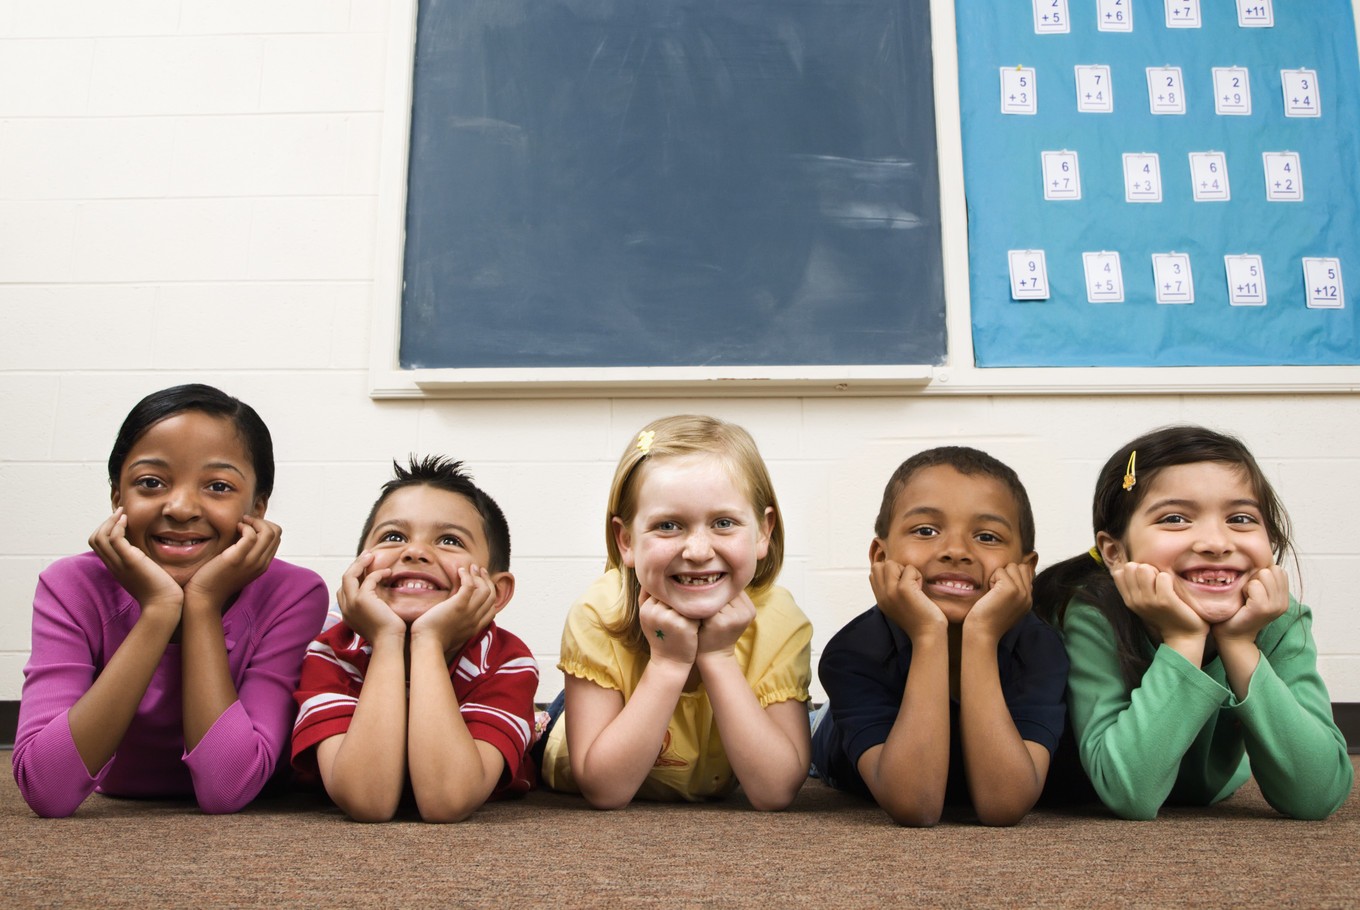 Broaden your horizons in a multicultural classroom